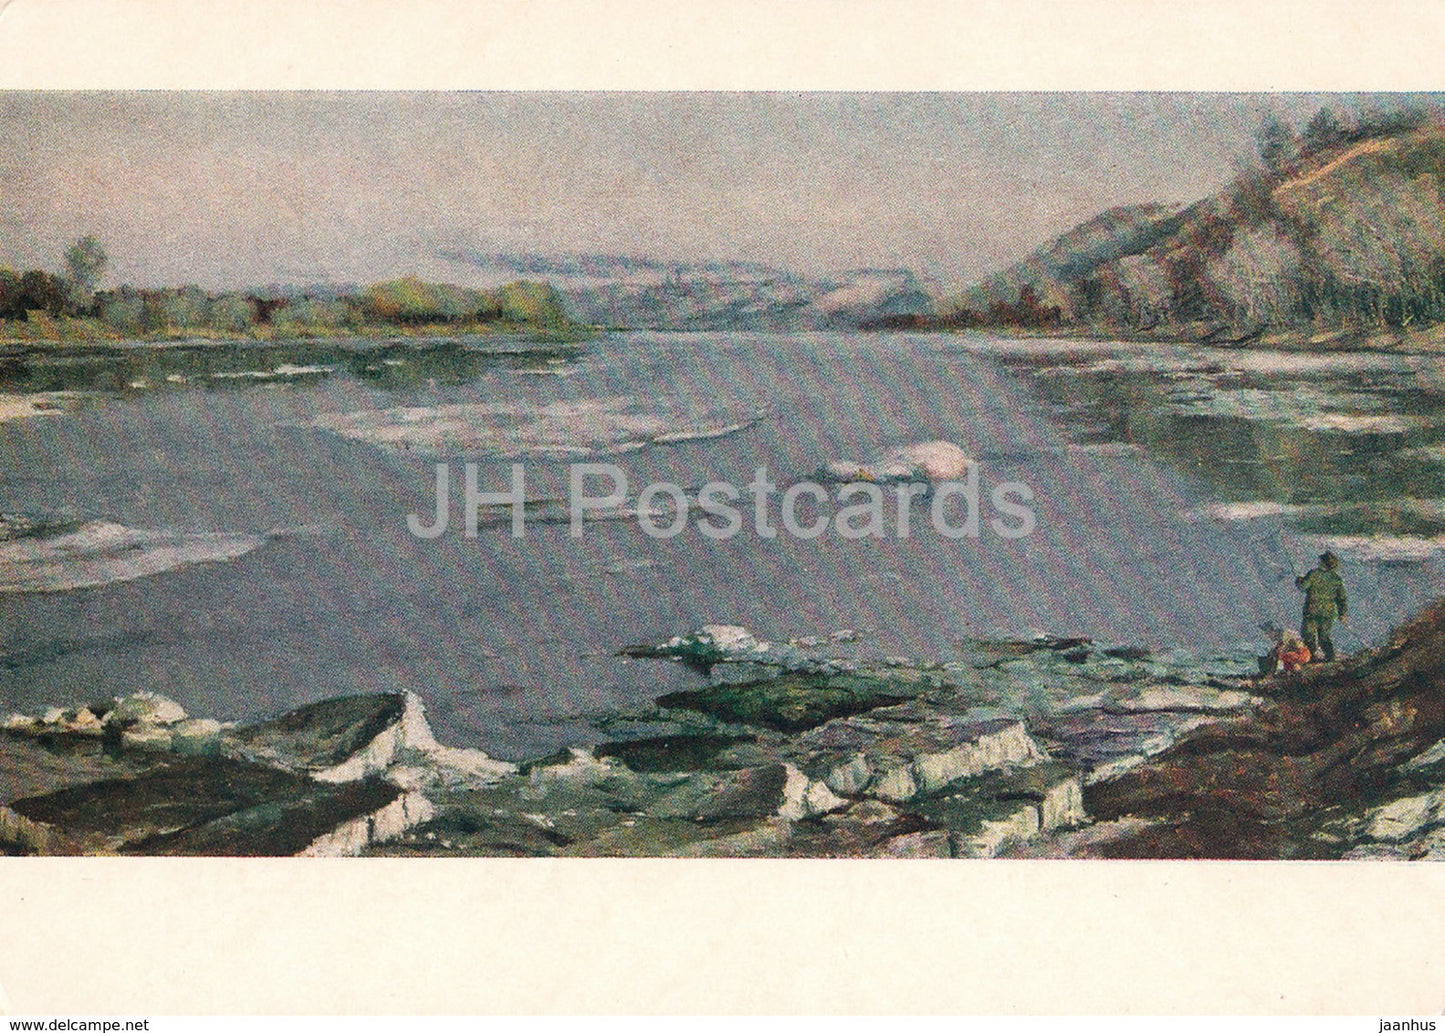 painting by N. Russkih - Ice drift on the Belaya river - Russian art - 1955 - Russia USSR - unused - JH Postcards